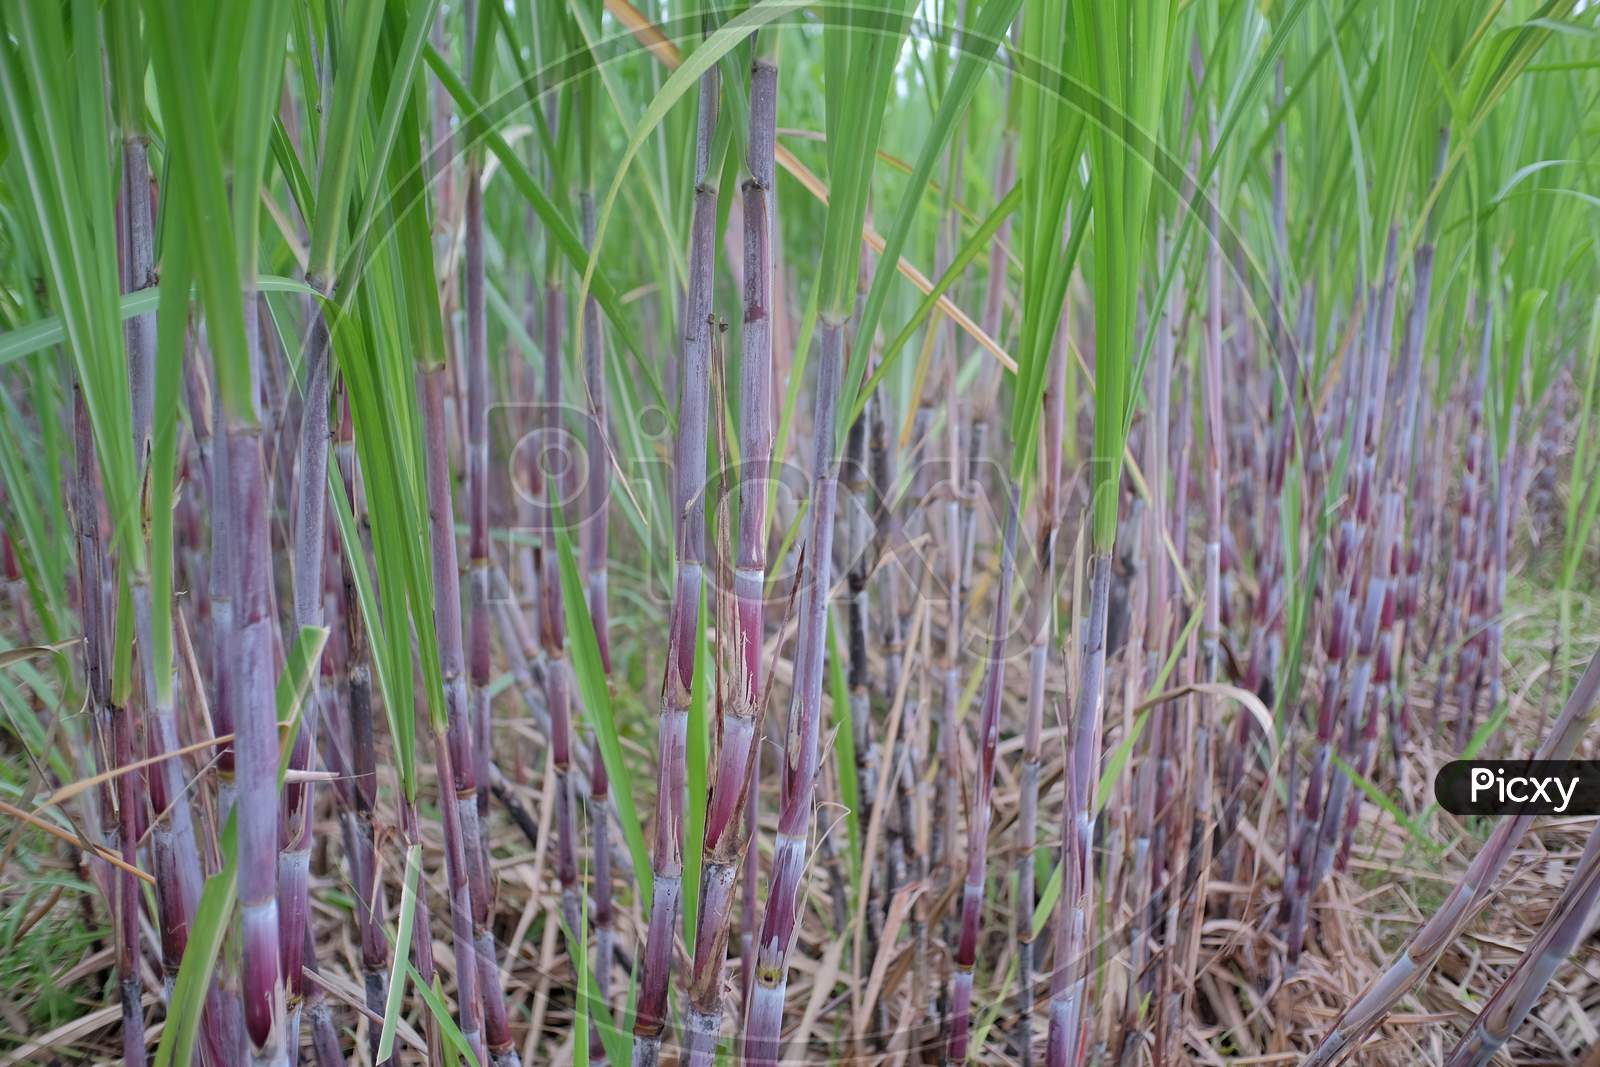 Sugarcane plants that are still young